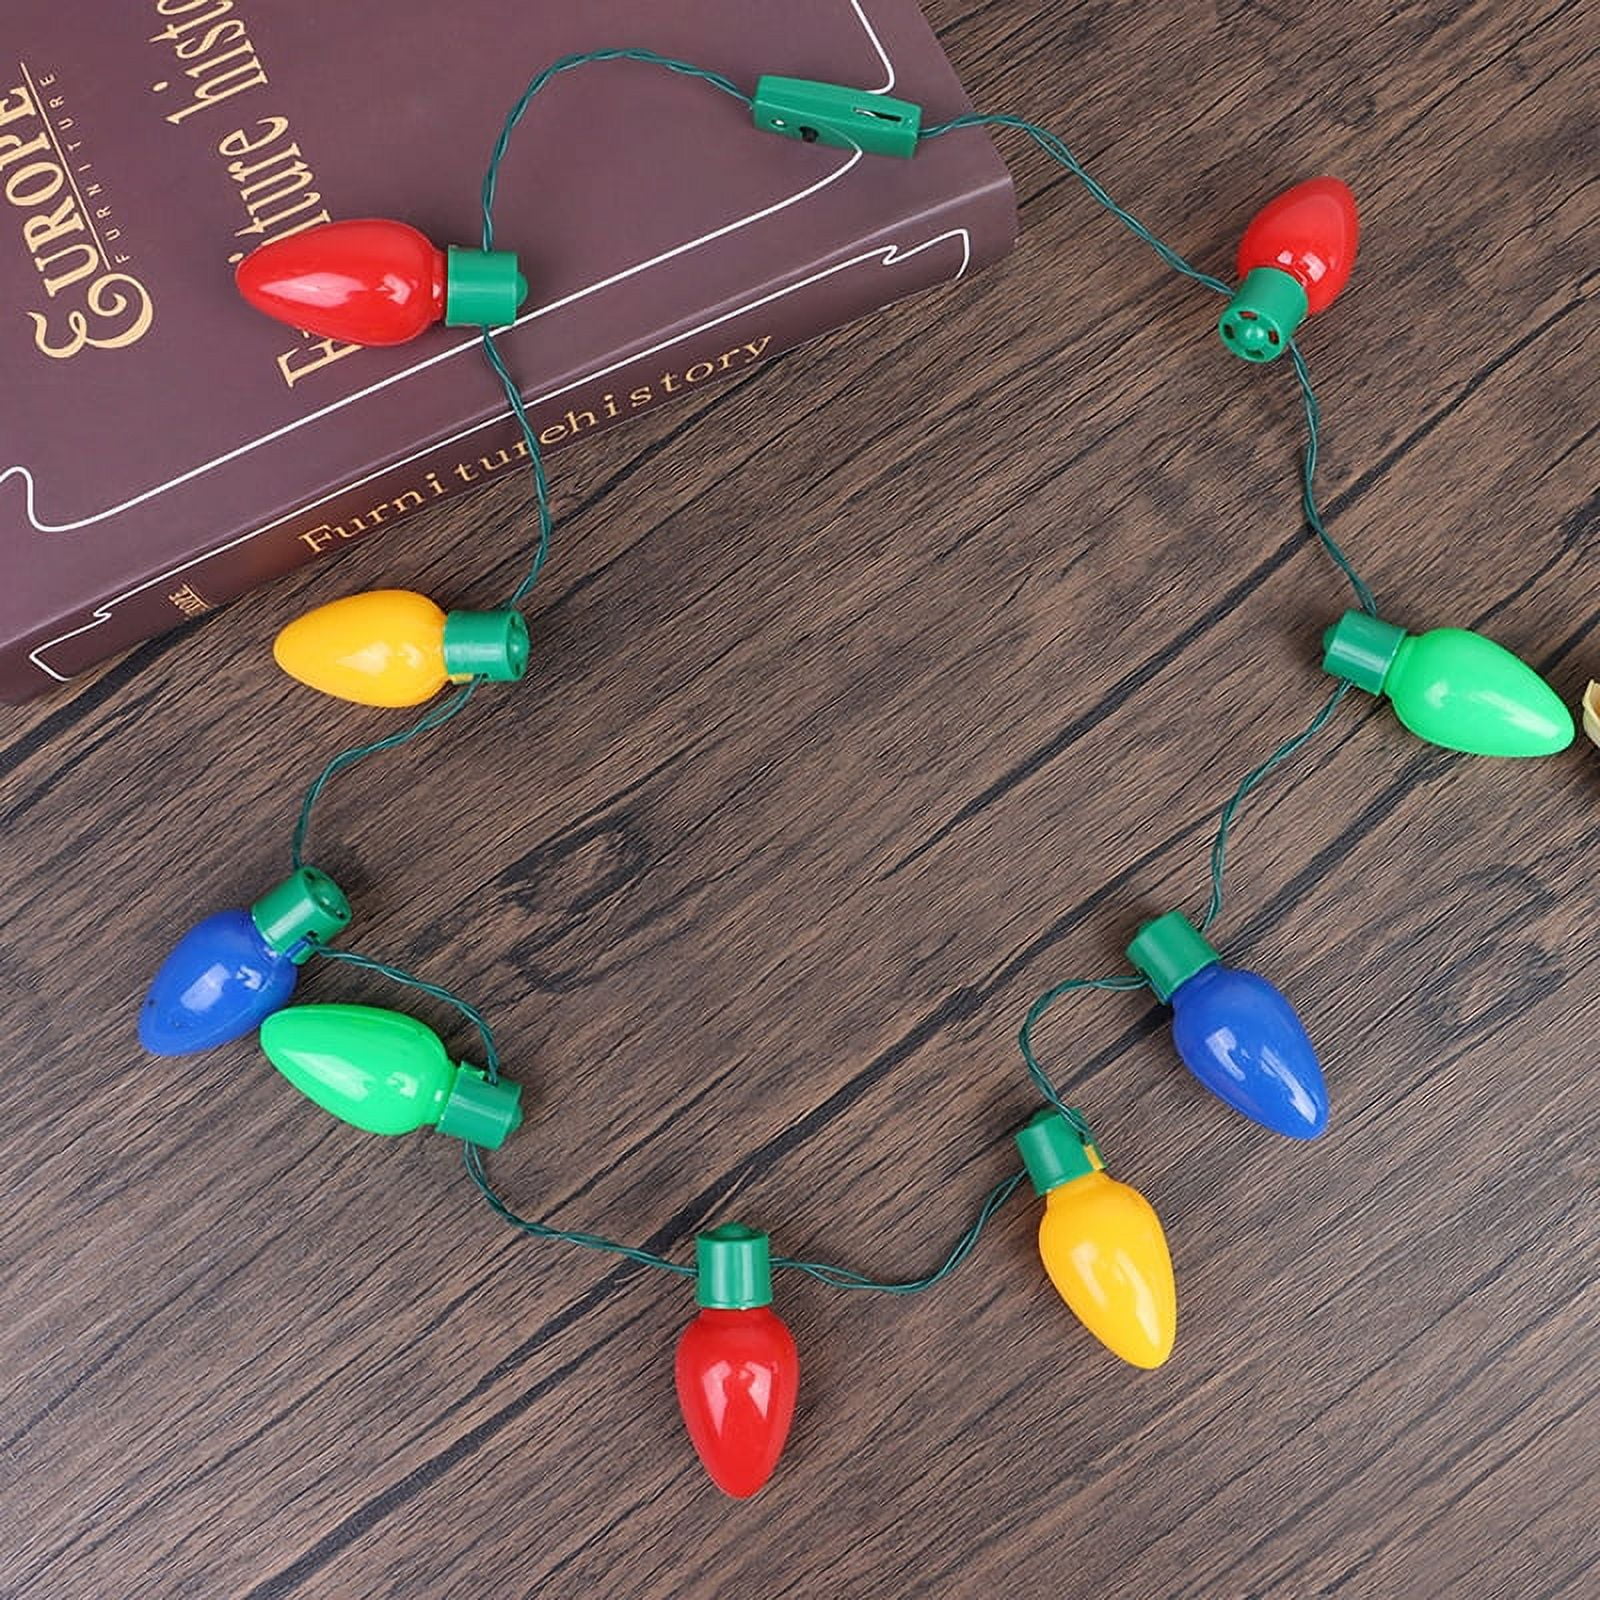 Light Up Christmas Bulb Earrings or Necklace - The Ugly Sweater Shop